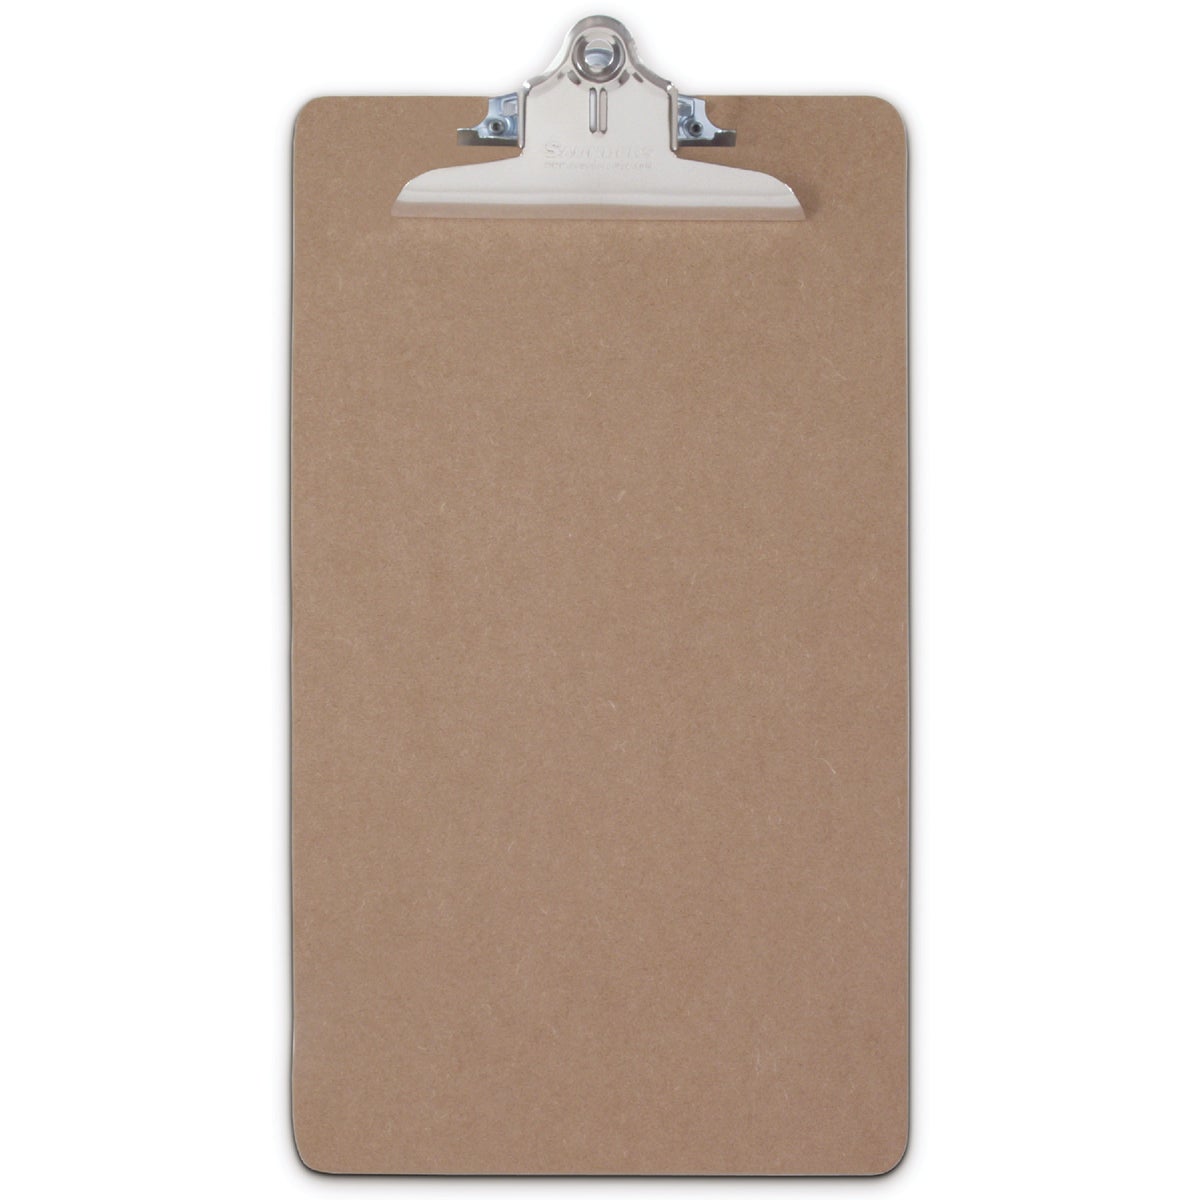 Item 973513, Legal size hardboard clipboard ideal to use as a portable writing surface.